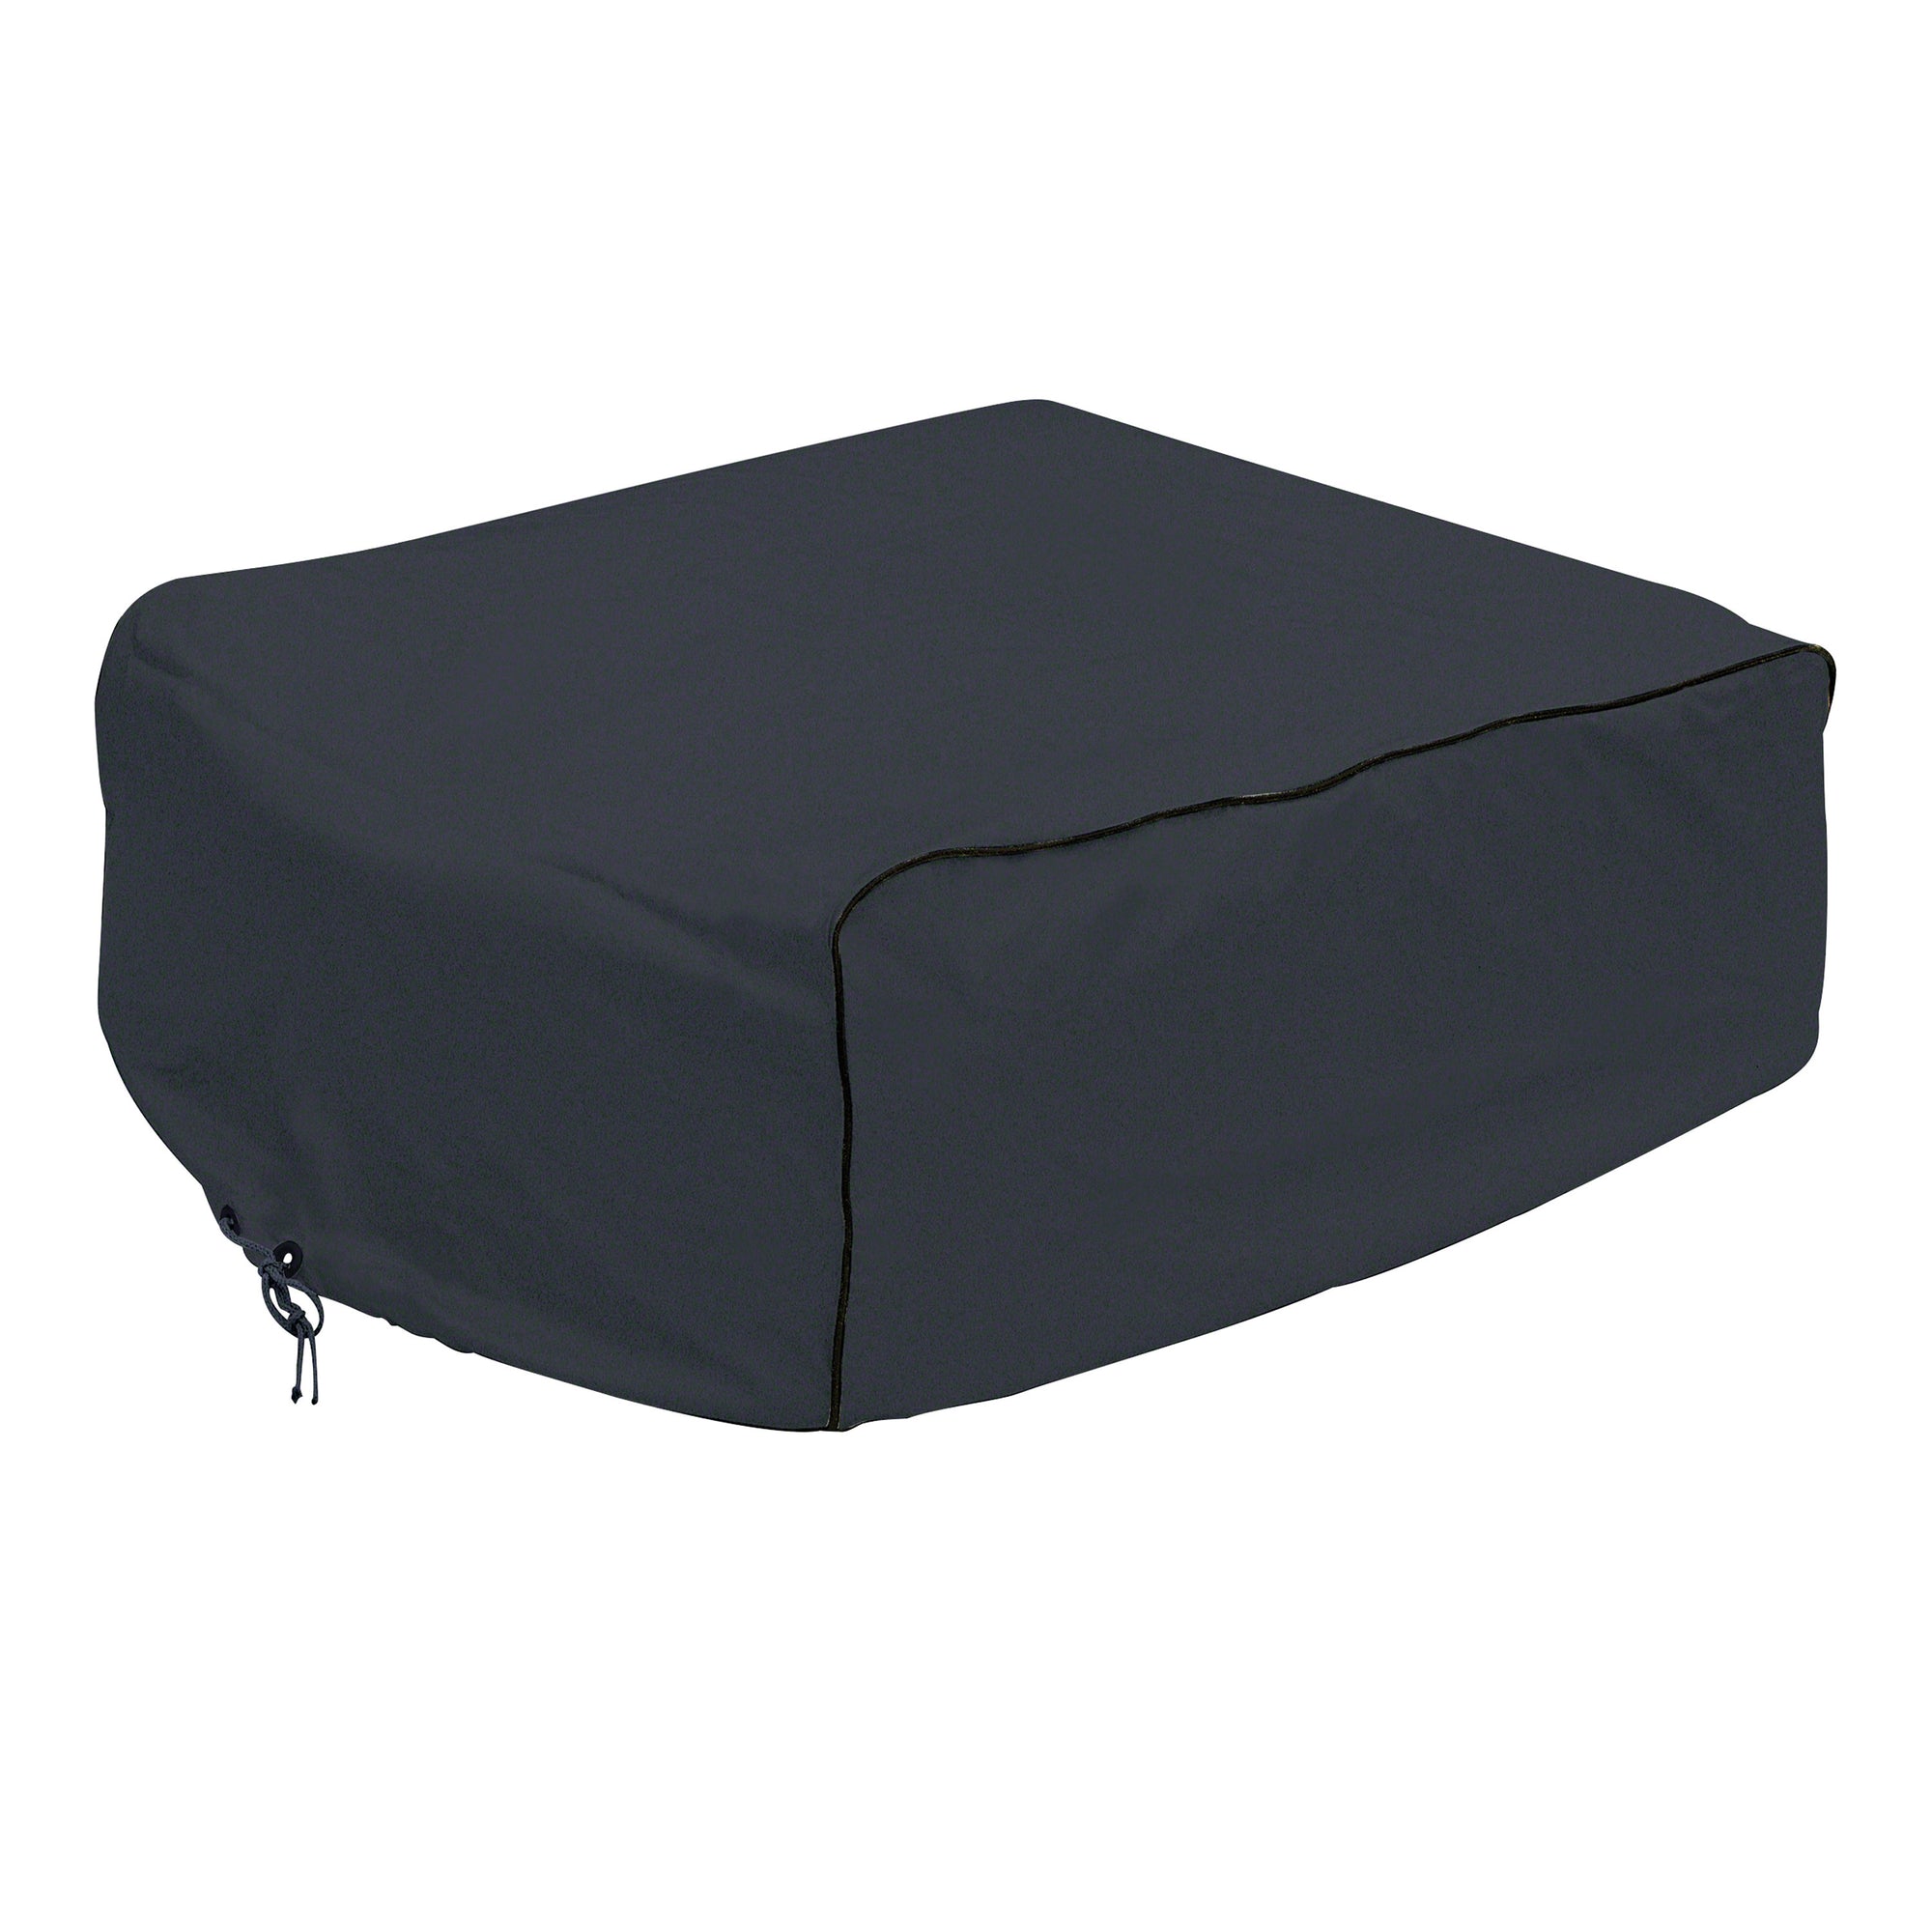 Classic Accessories 80-252 A/C Cover For Coleman Mach 8 - Black